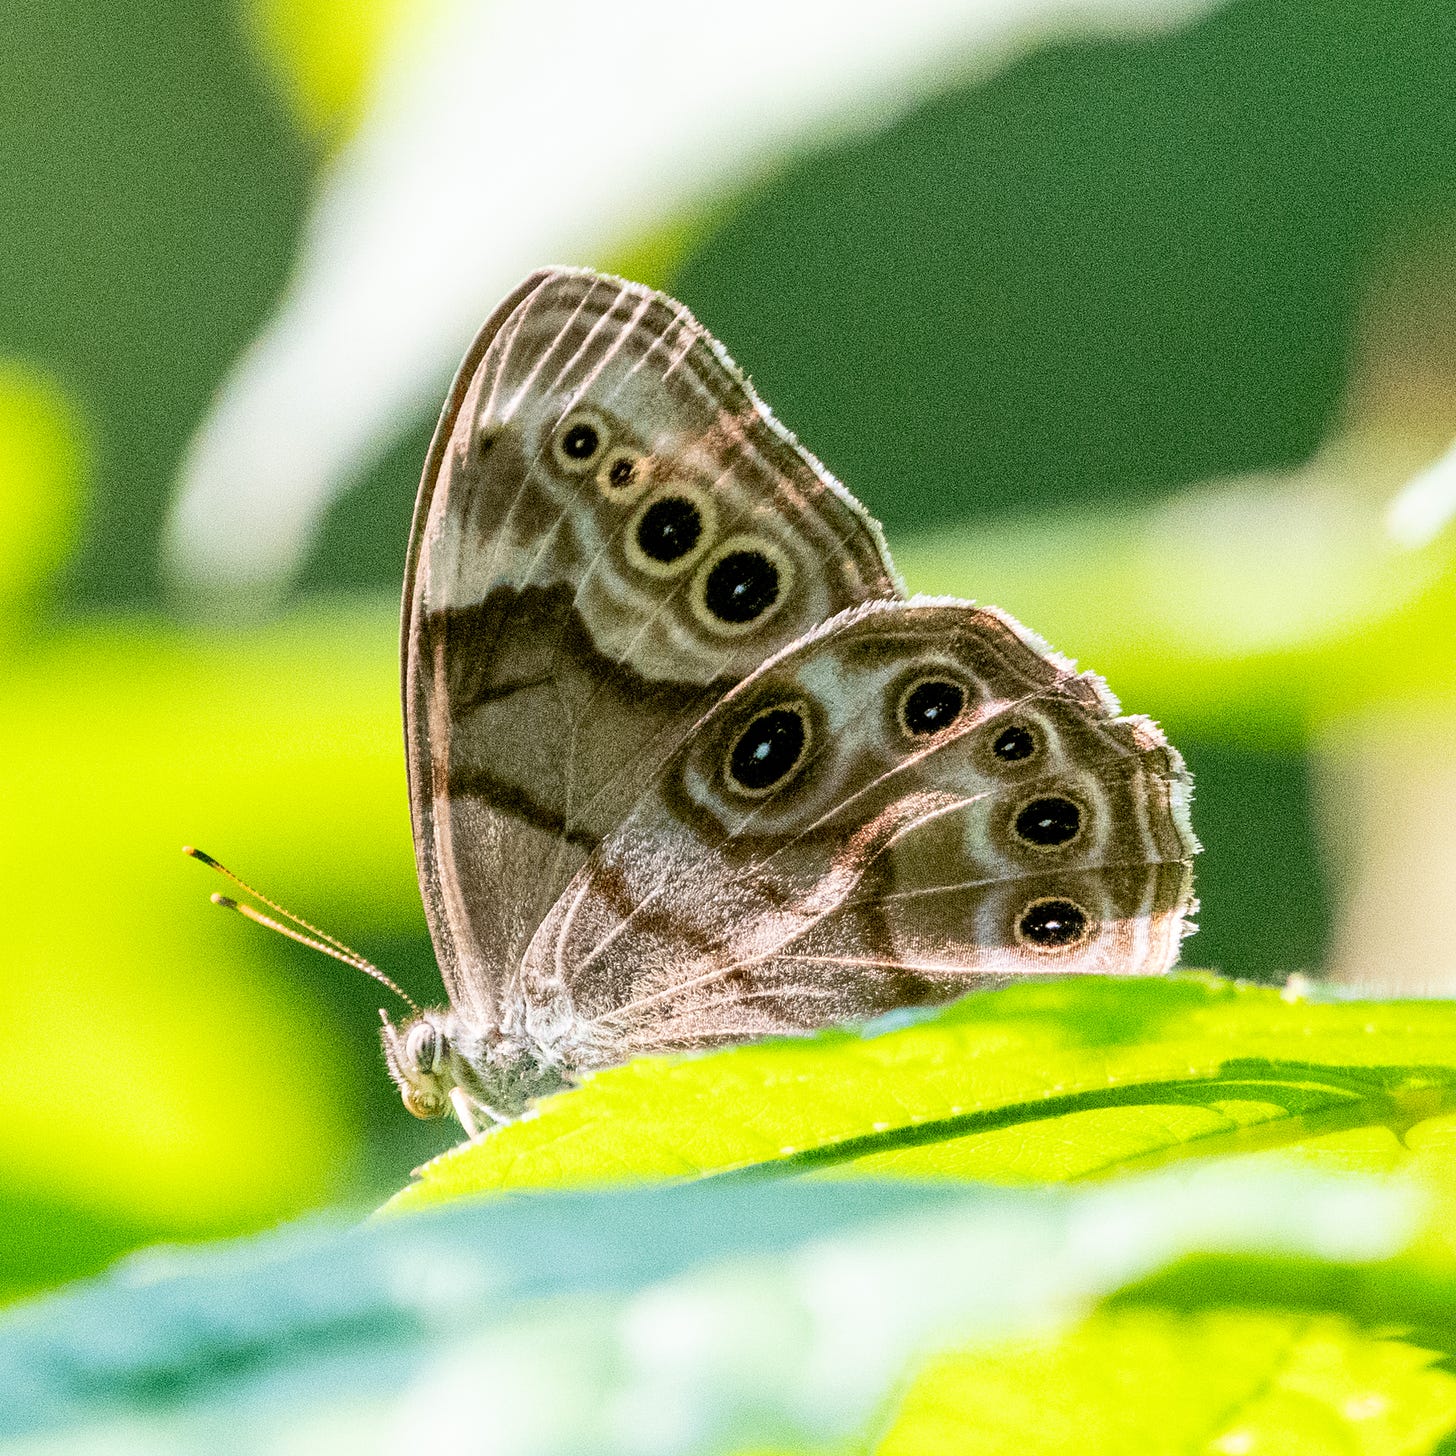 A Northern pearly eye butterfly, wings folded, in profile